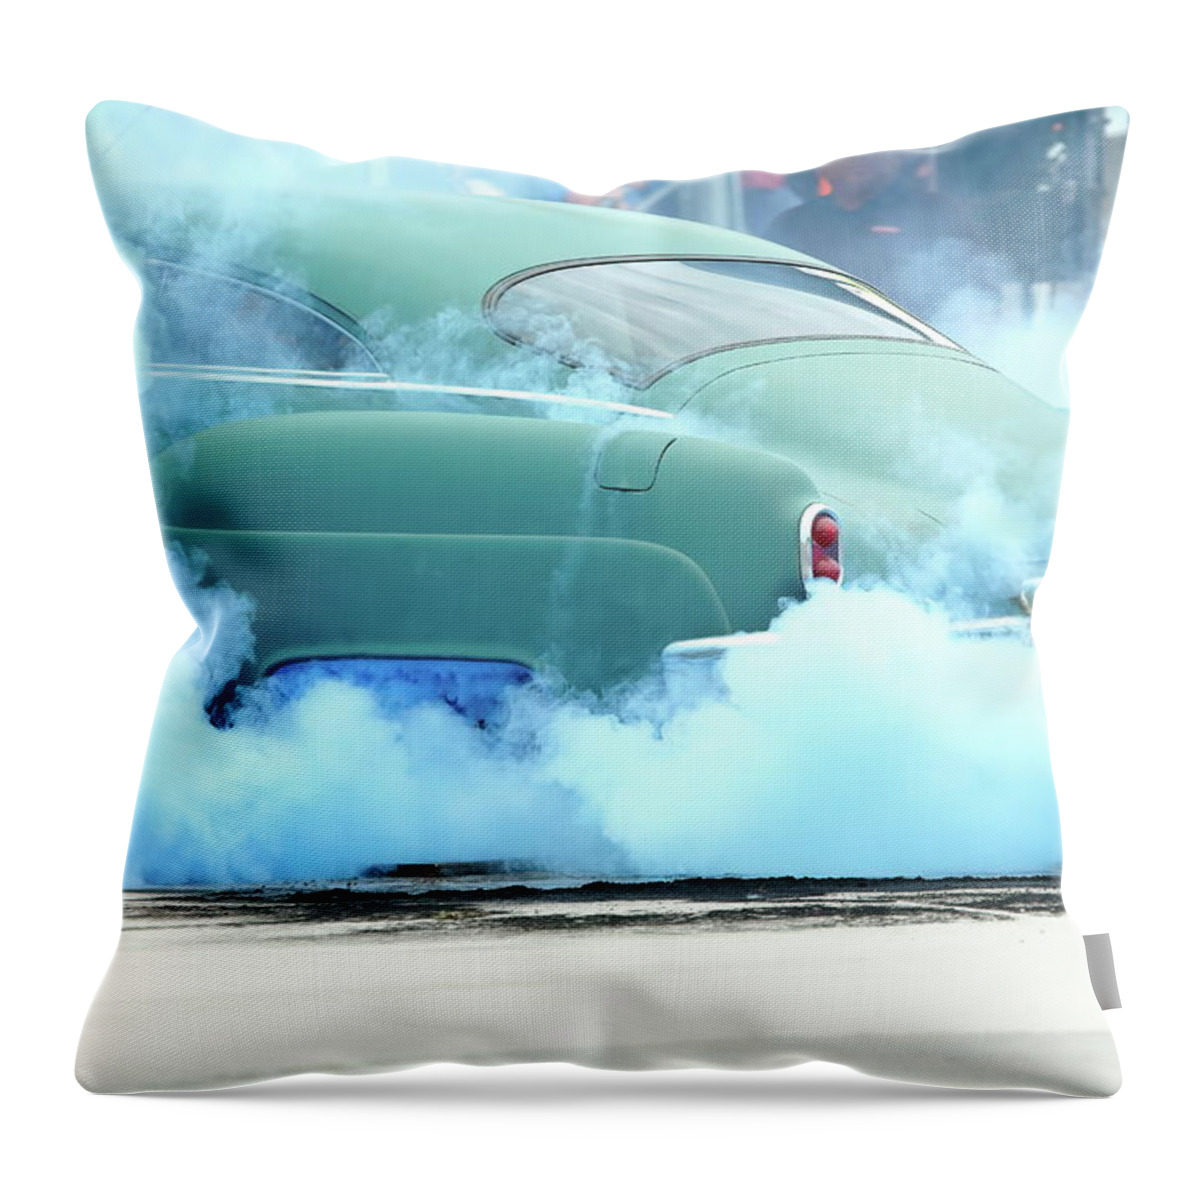 Classic Throw Pillow featuring the photograph Smoke Em If You Got Em by Lens Art Photography By Larry Trager